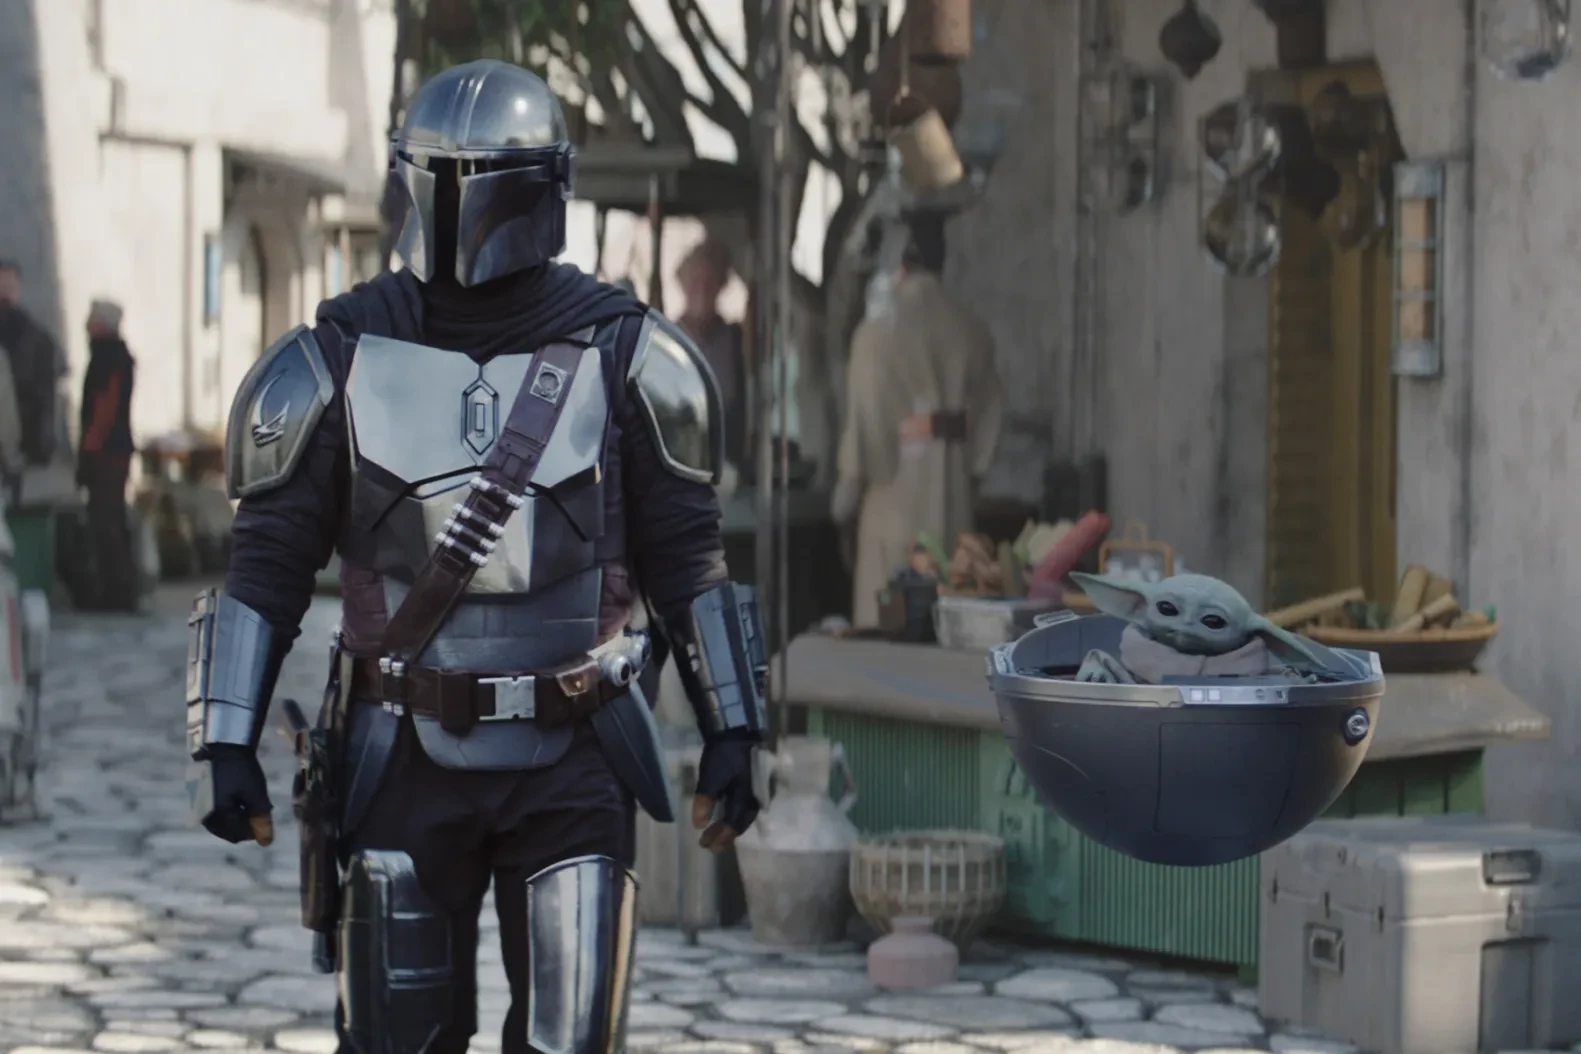 The Mandalorian and Grogu in a still from the Disney Plus series The Mandalorian